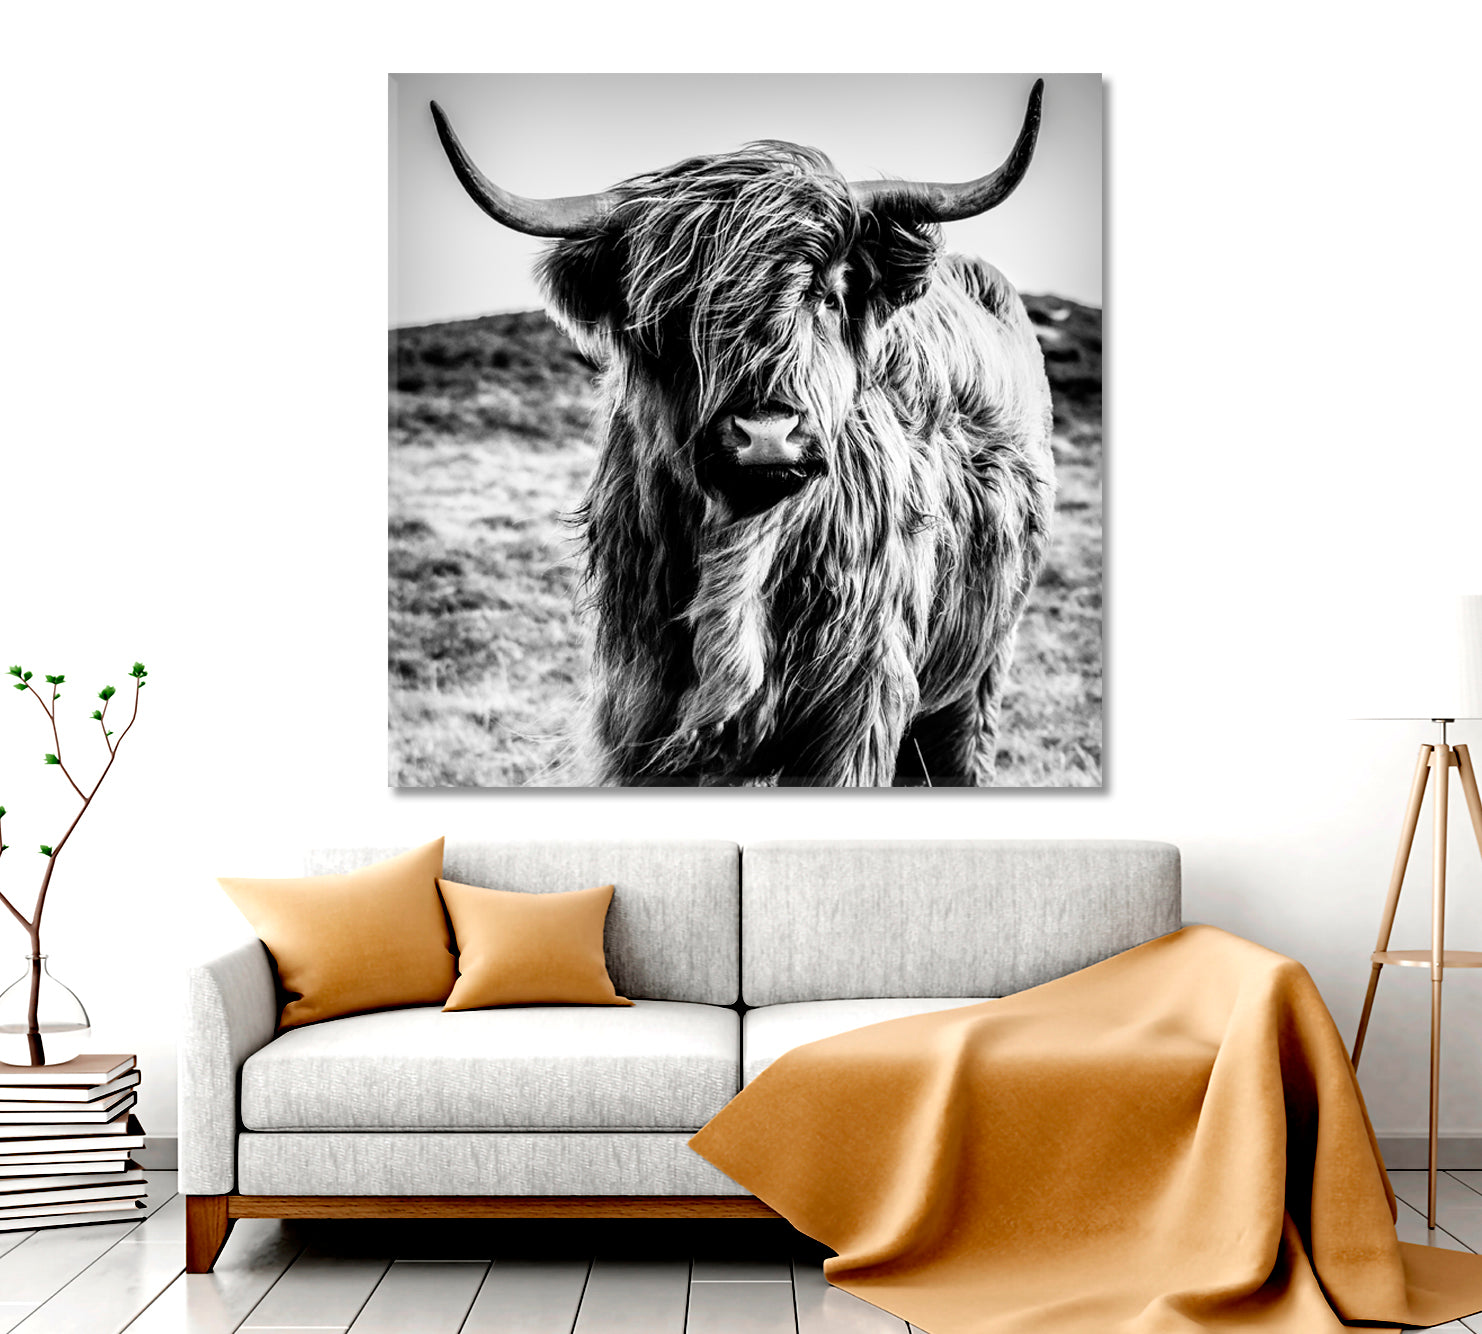 Black and White Cattle Shaggy Highland Cow Animals Canvas Print Artesty 1 Panel 12"x12" 